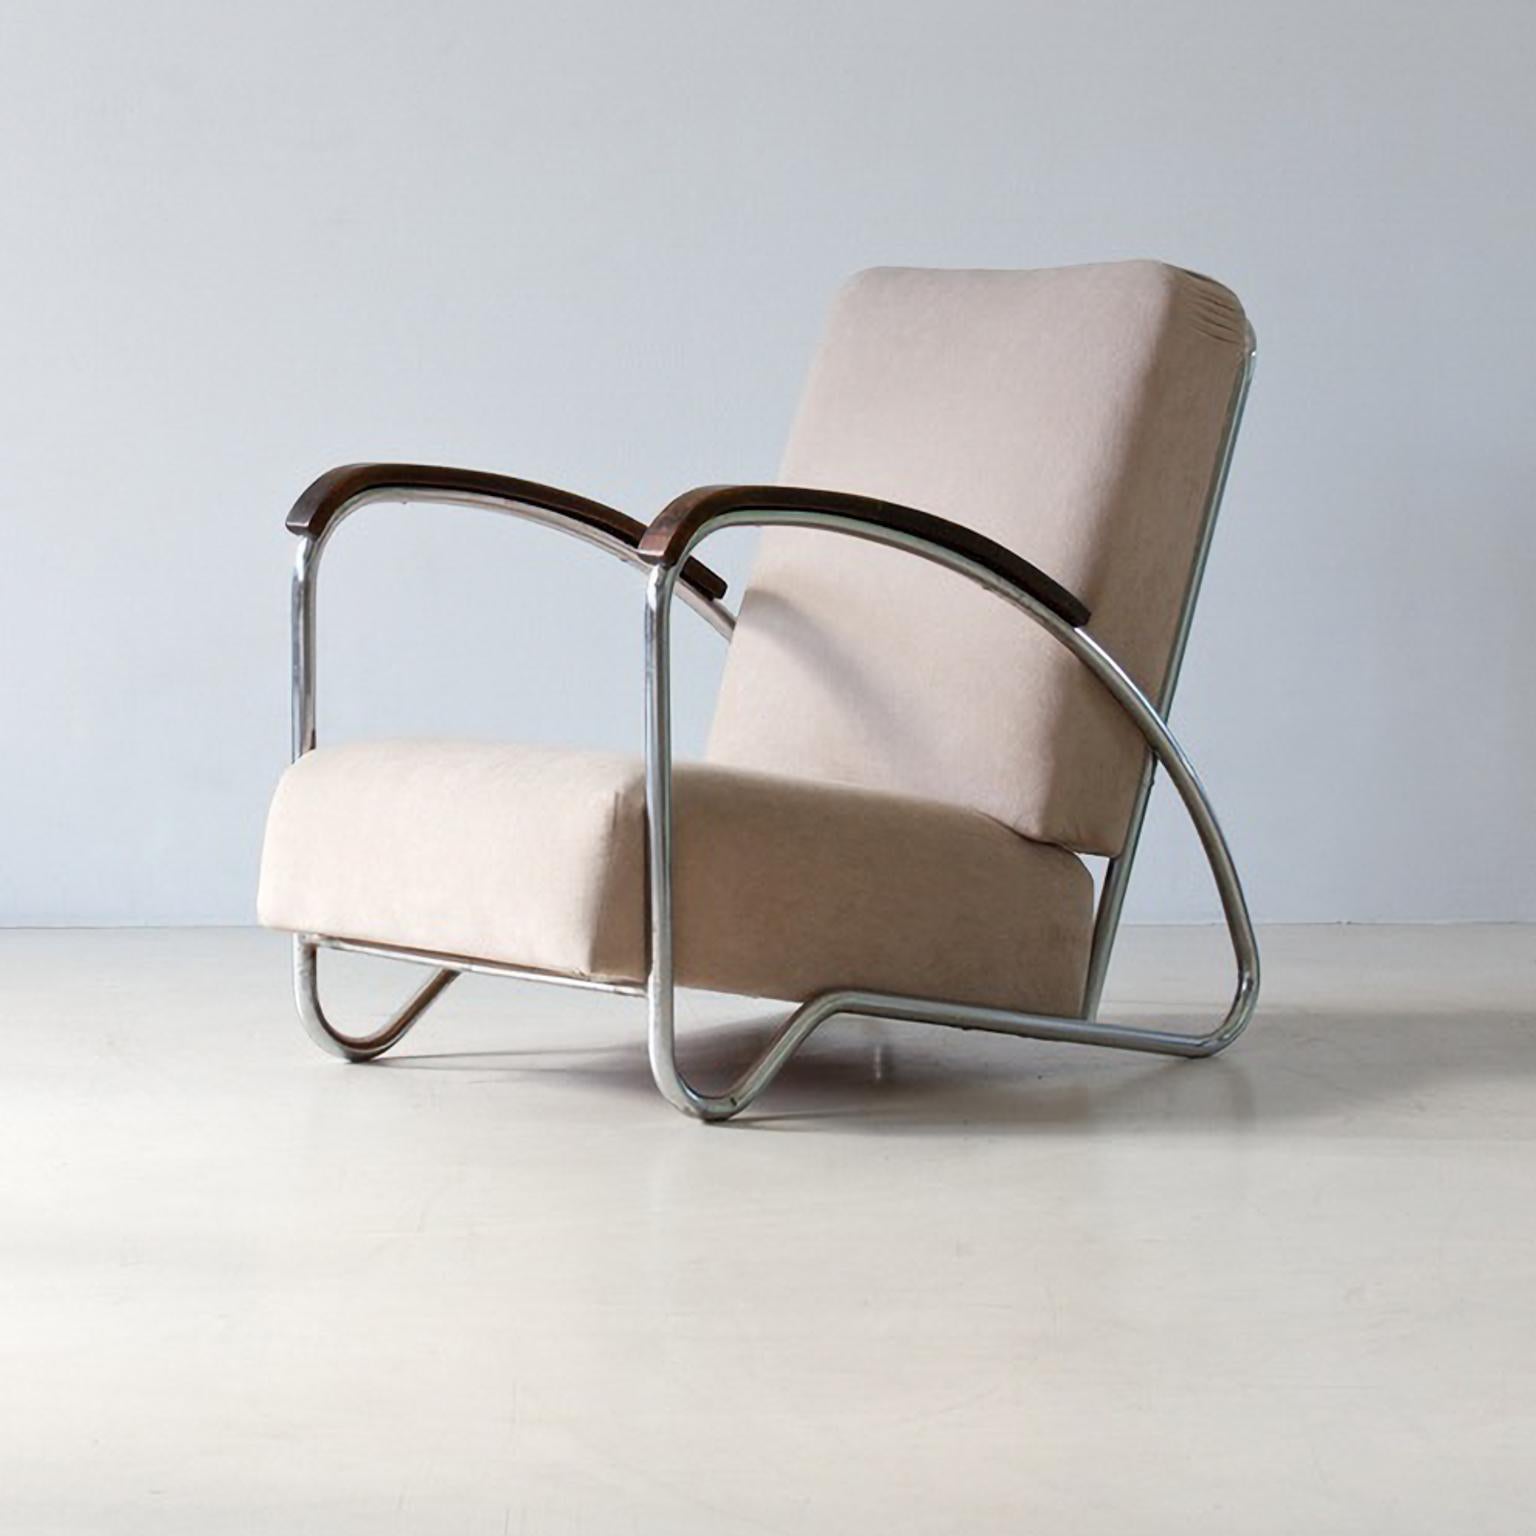 Modernist tubular steel armchairs with an elegant sinuous shape. The upholstery can be covered with fabric or leather. 
The armchairs were designed and manufactured by Gottwald, Czechoslovakia, circa 1930.